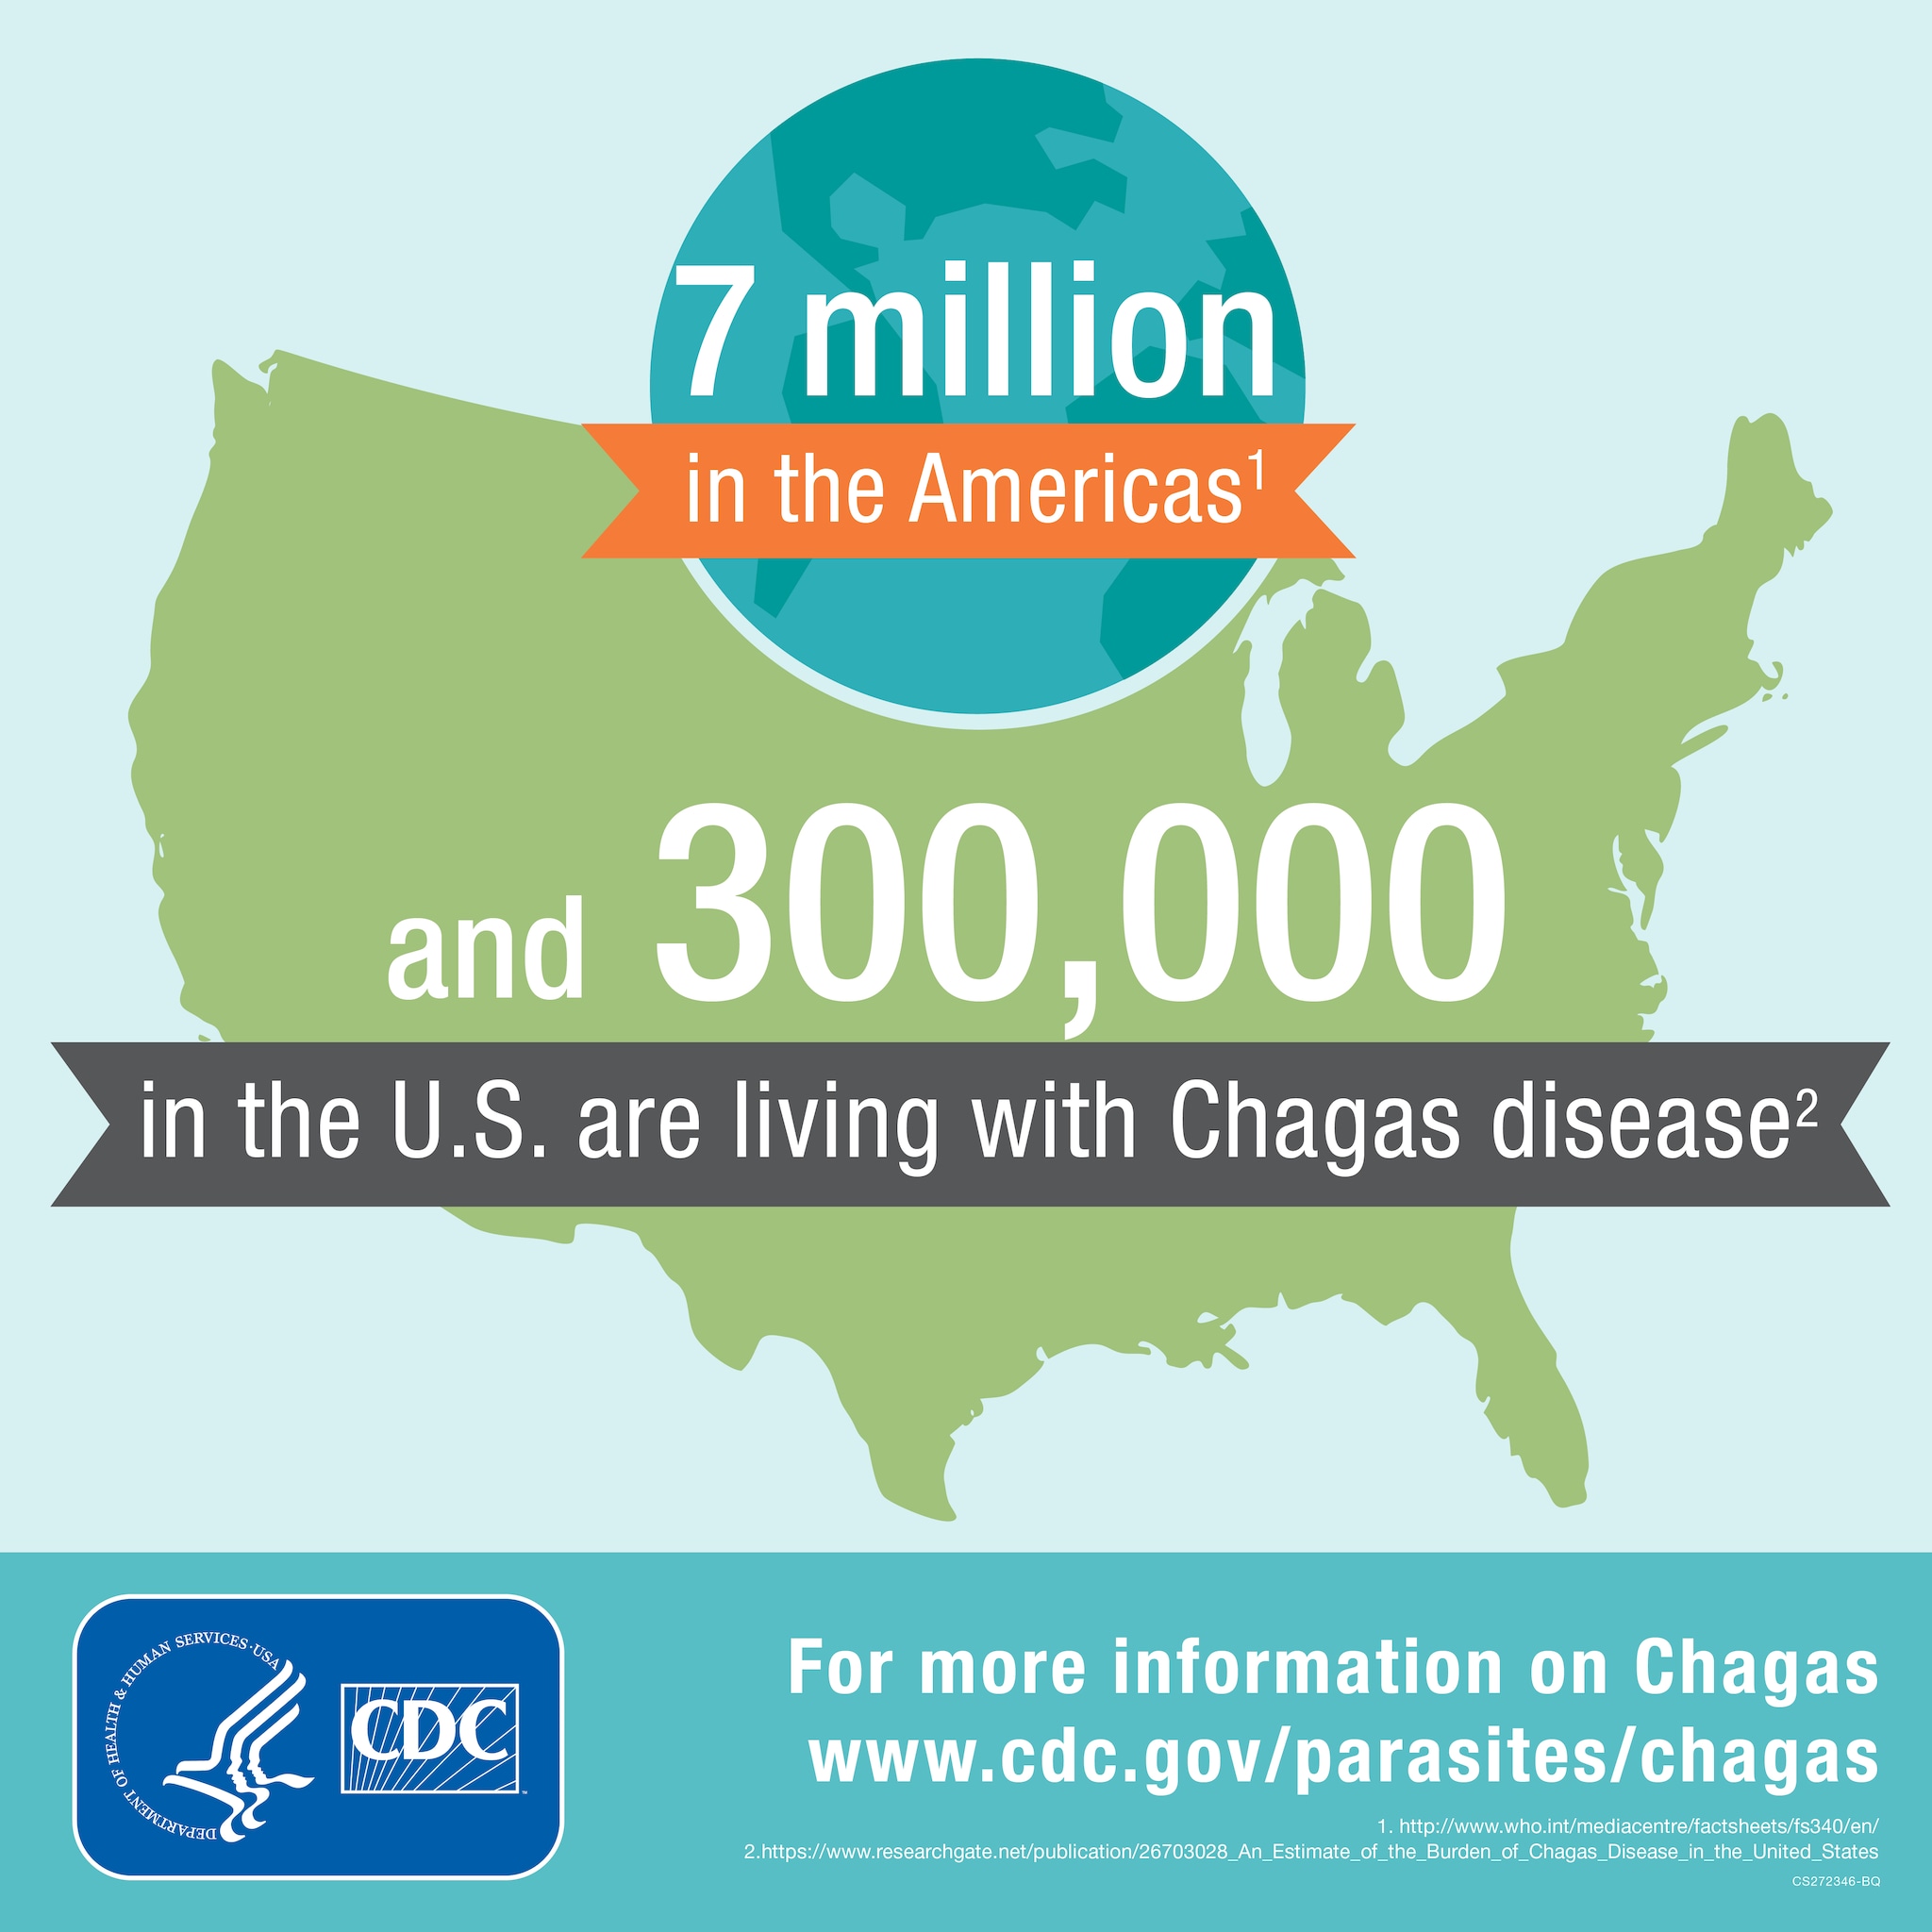 - 7 Million in the Americas and 300,00 in the U.S. are living with Chagas disease.